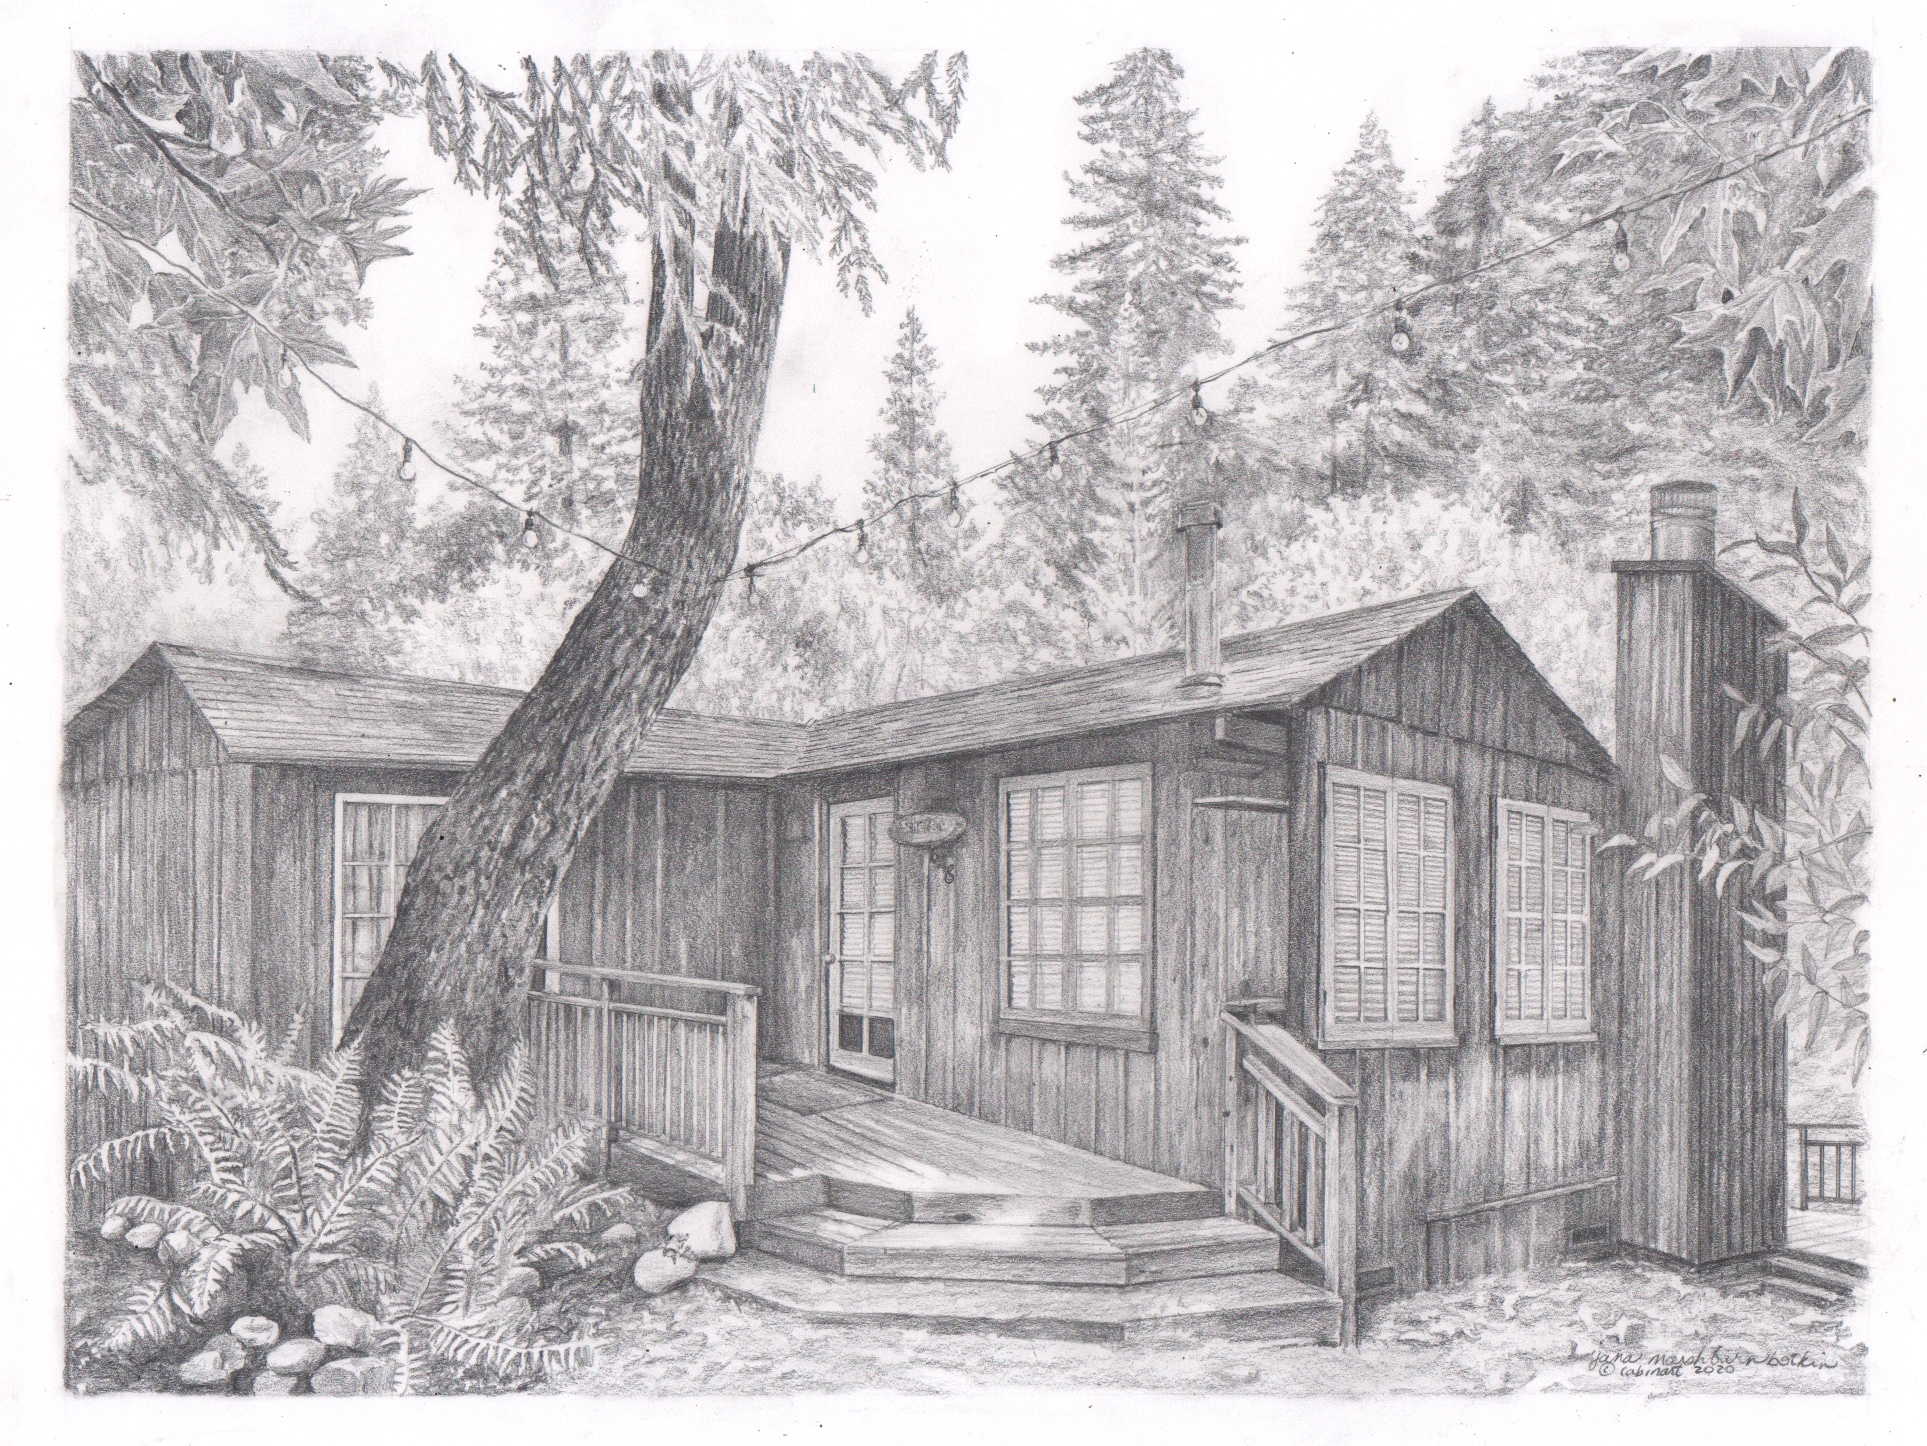 pencil drawings of cabins howtohostavirtualpostersession